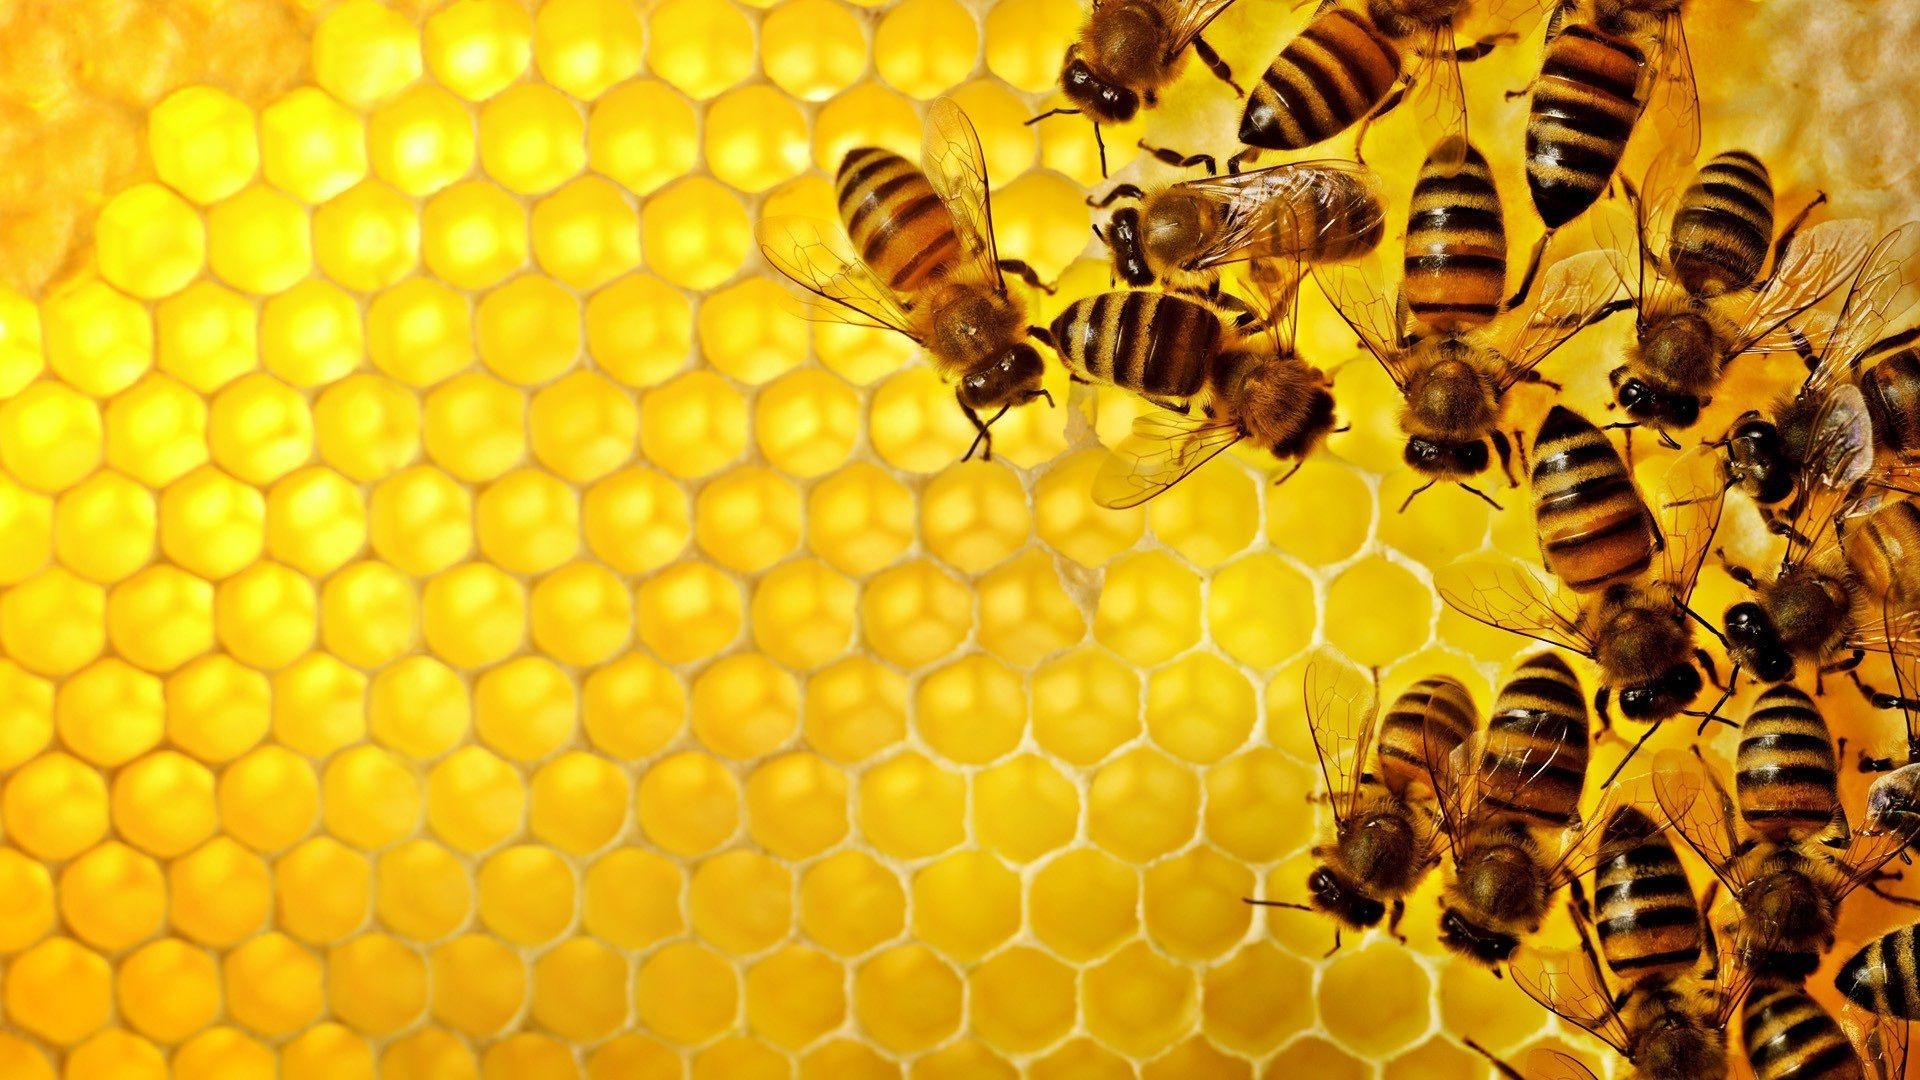 Bee: Honeycomb, A structure of hexagonal cells used to store raw honey, pollen, propolis, royal jelly. 1920x1080 Full HD Wallpaper.